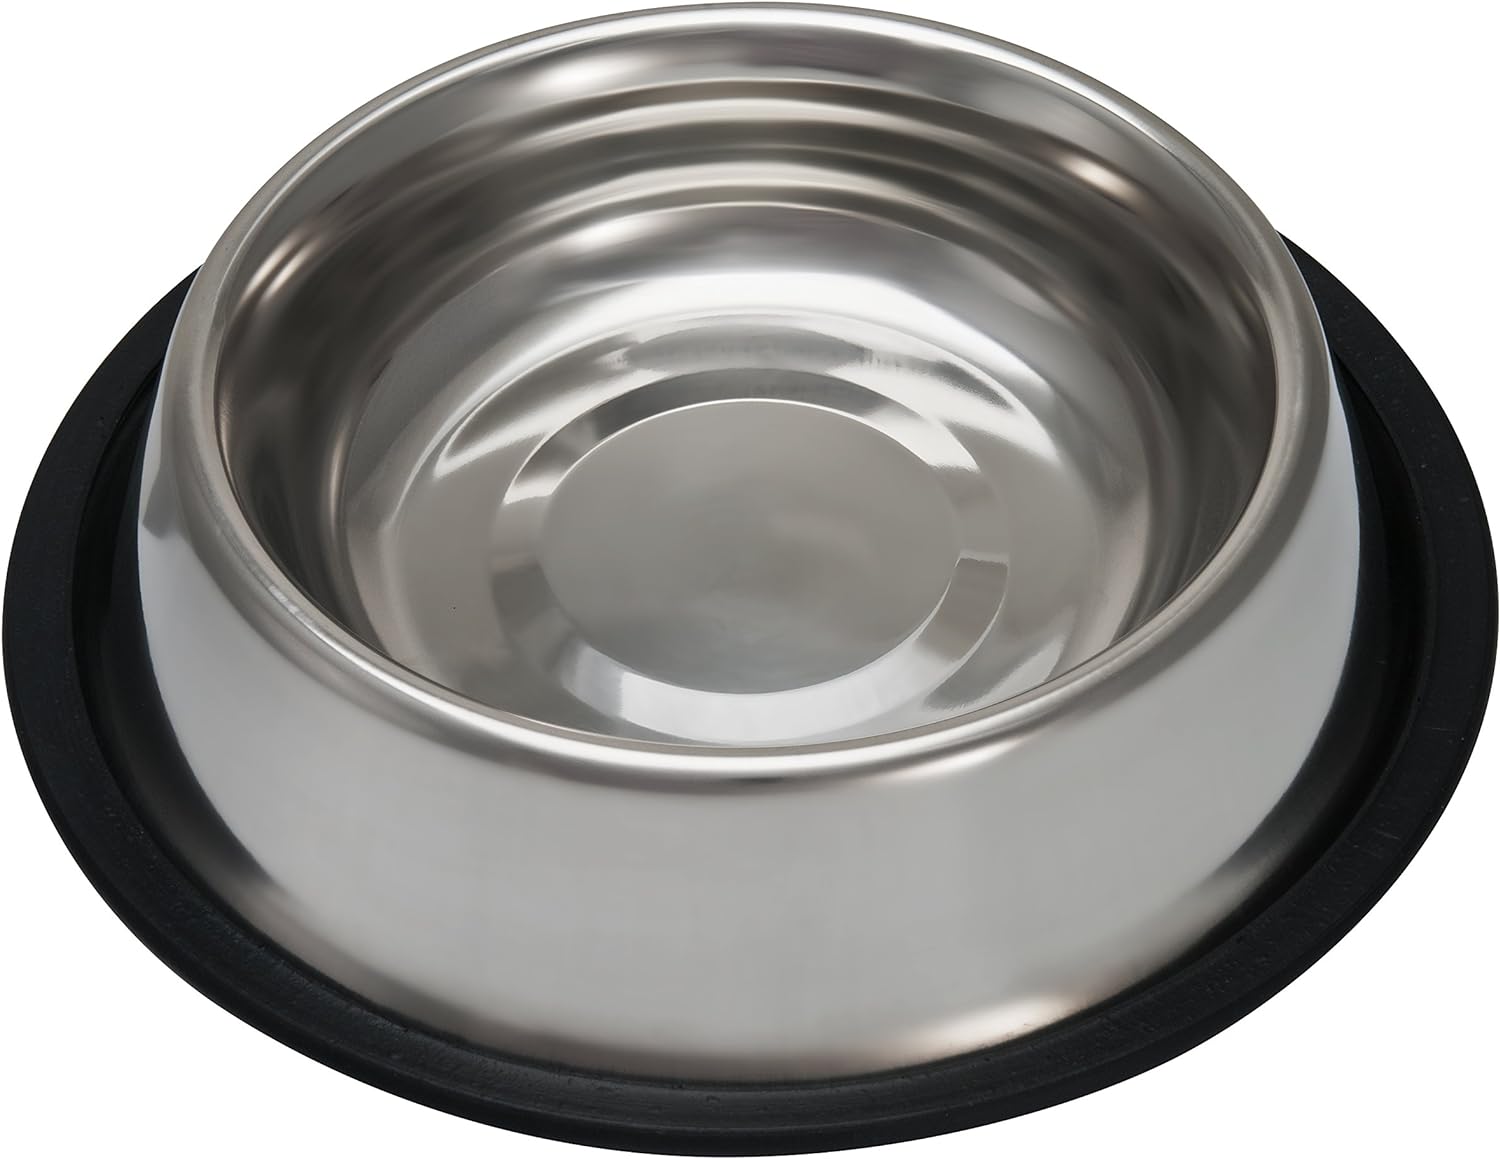 Loving Pets Stainless Steel No-Tip Pet Bowl